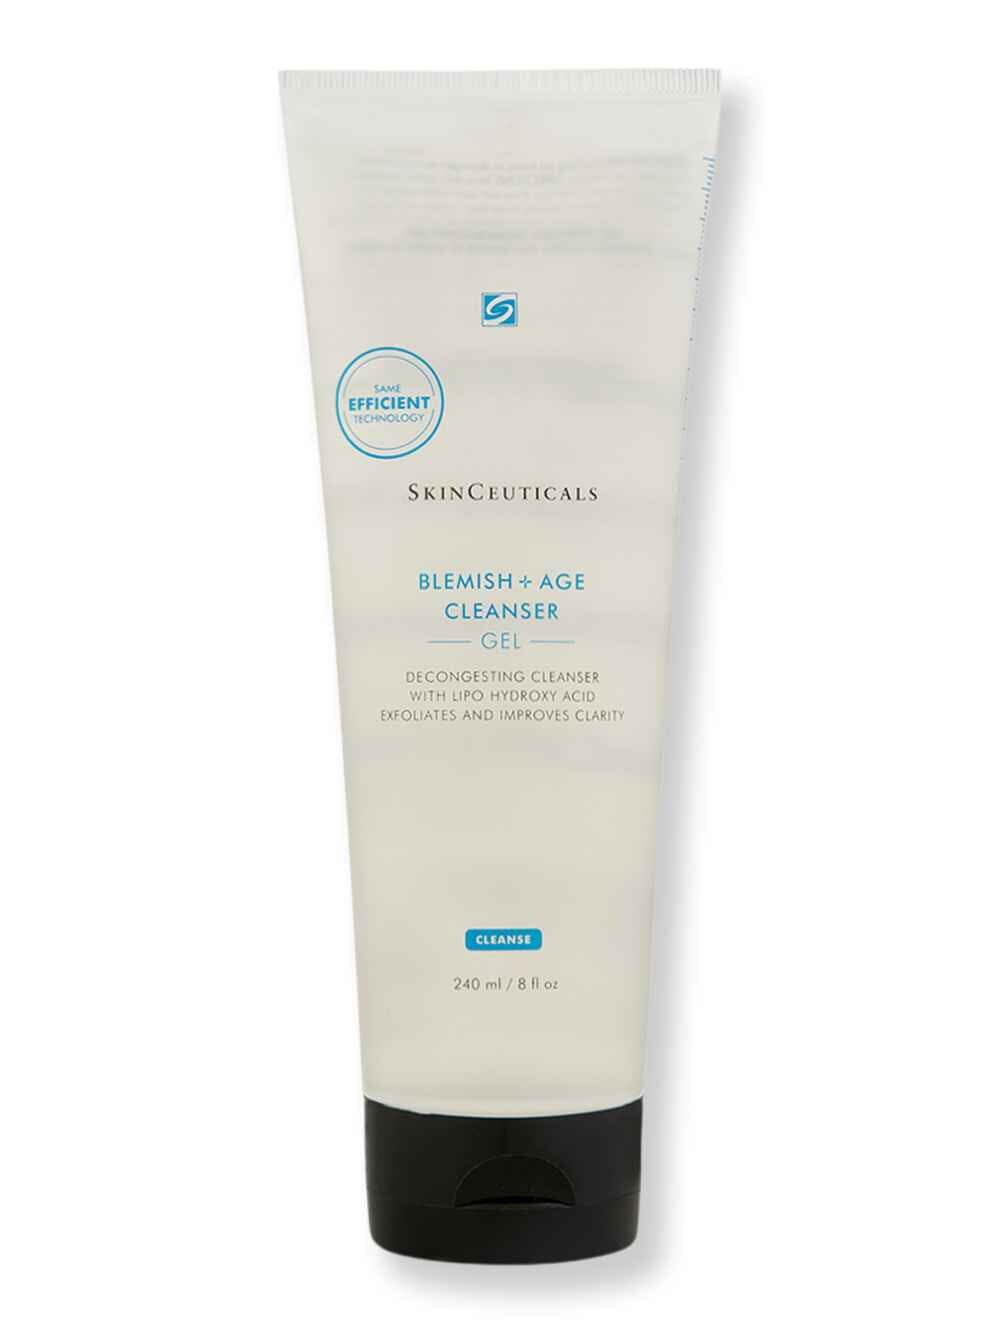 SkinCeuticals SkinCeuticals Blemish + Age Cleanser Gel 8 oz240 ml Face Cleansers 